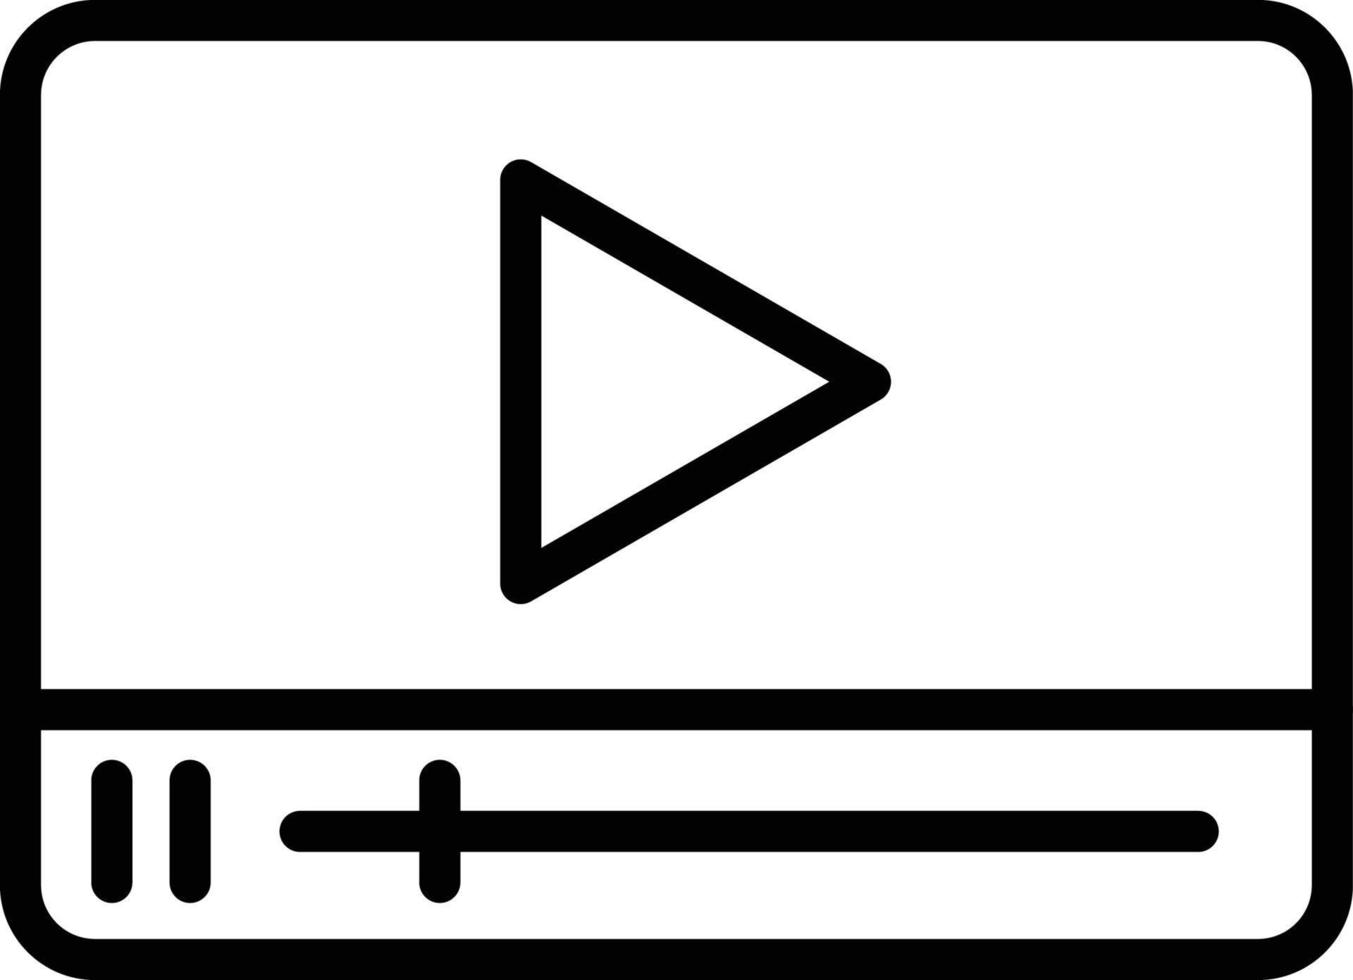 Media player Isolated Vector icon which can easily modify or edit